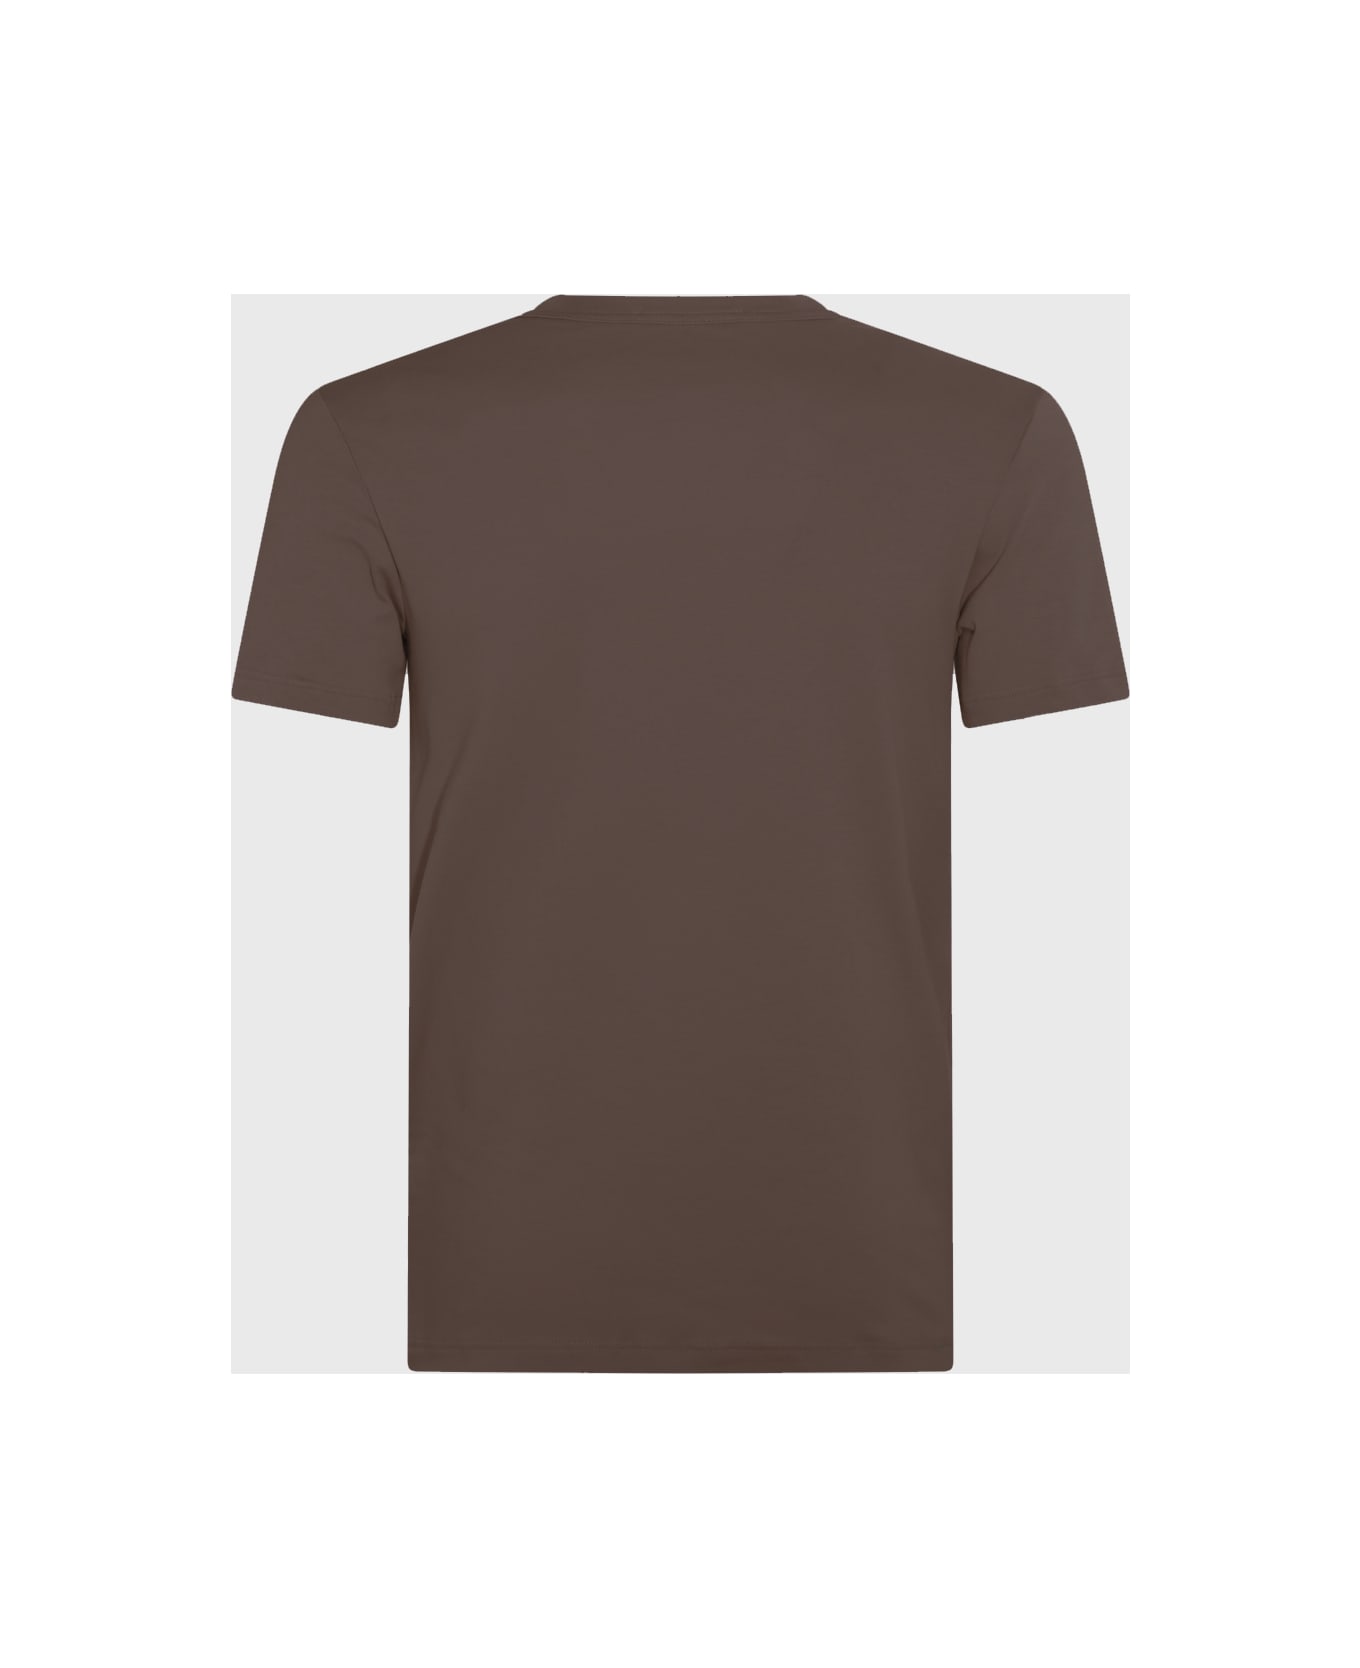 Tom Ford Brown Cotton Blend T-shirt - NUDE 8 シャツ